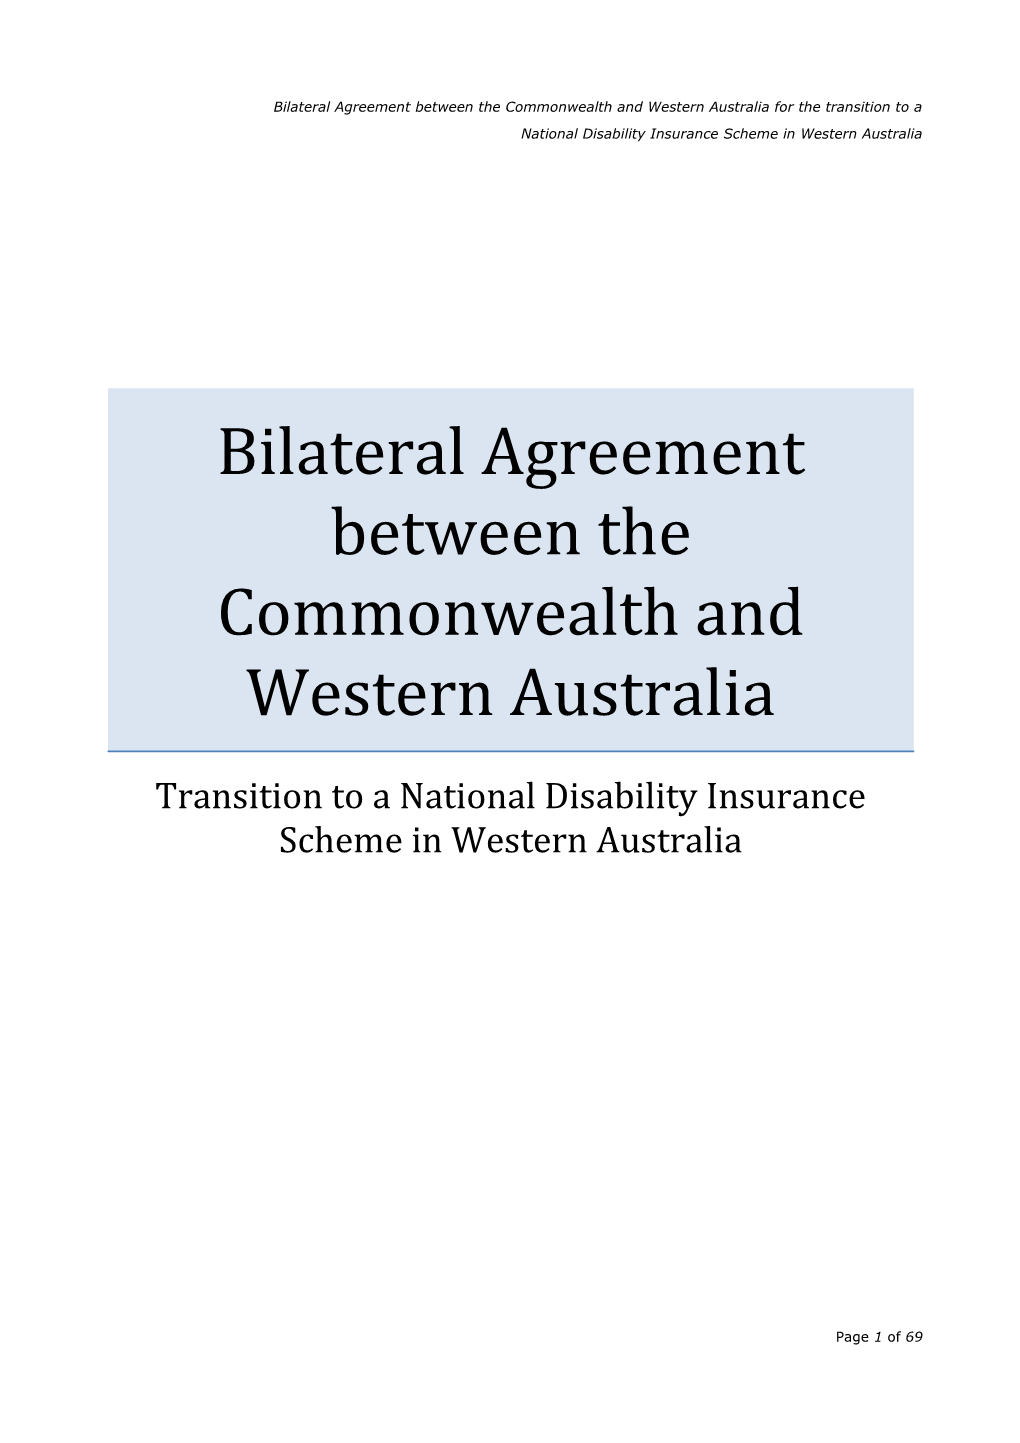 Bilateral Agreement Between the Commonwealth and Western Australia